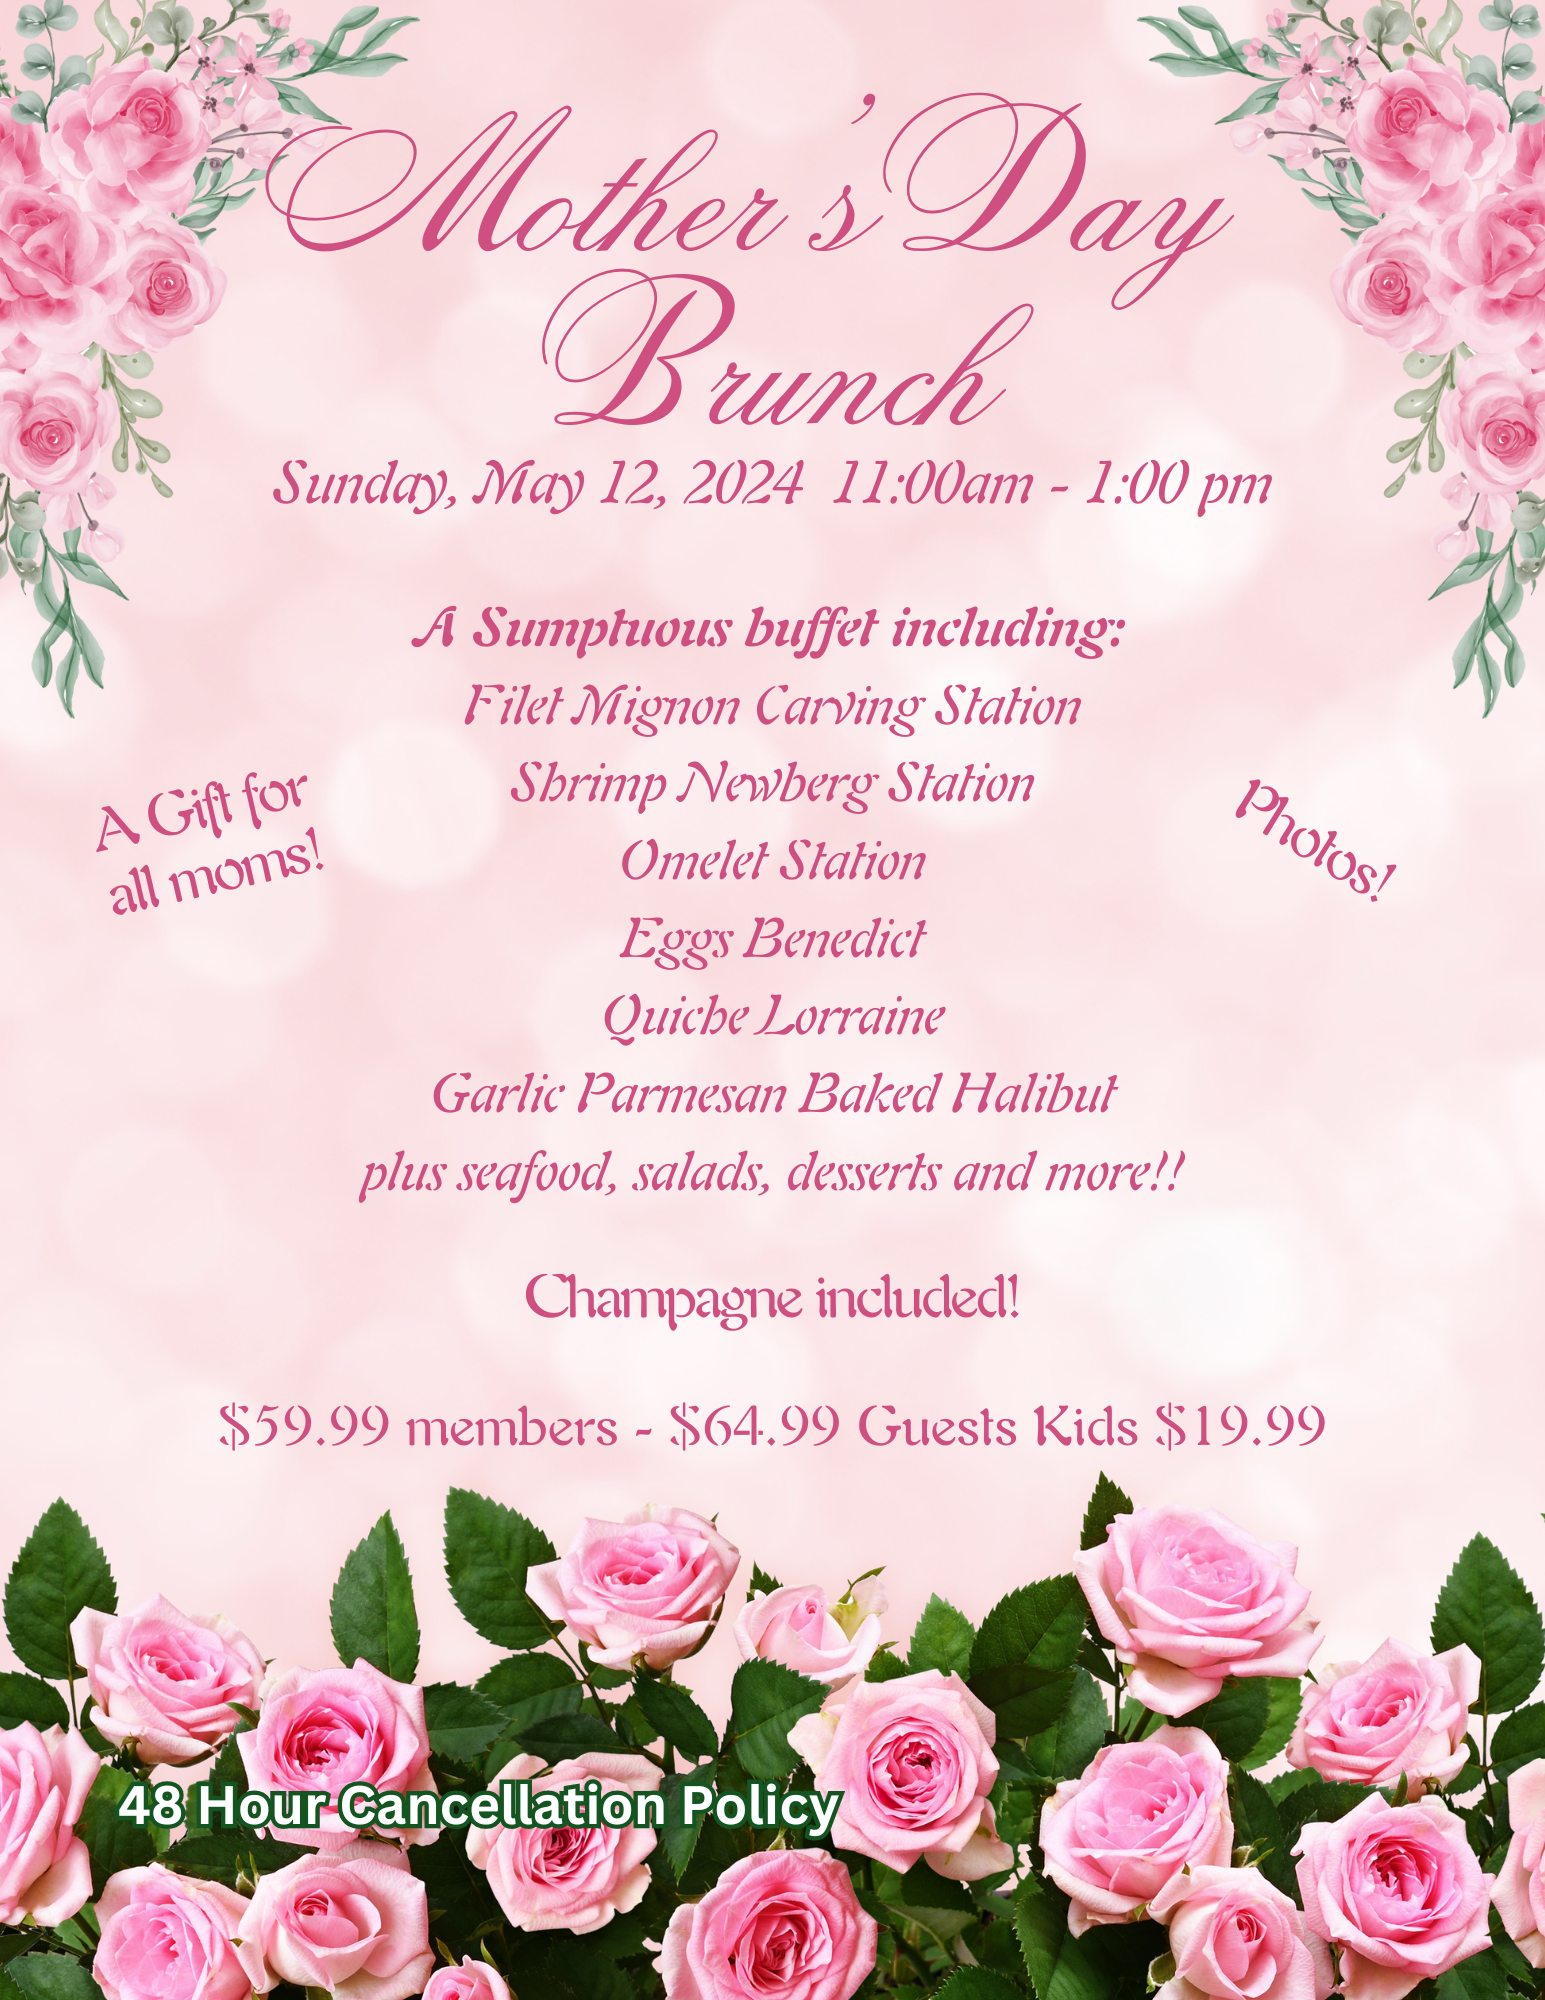 Mothers_Day_Brunch_%281%29